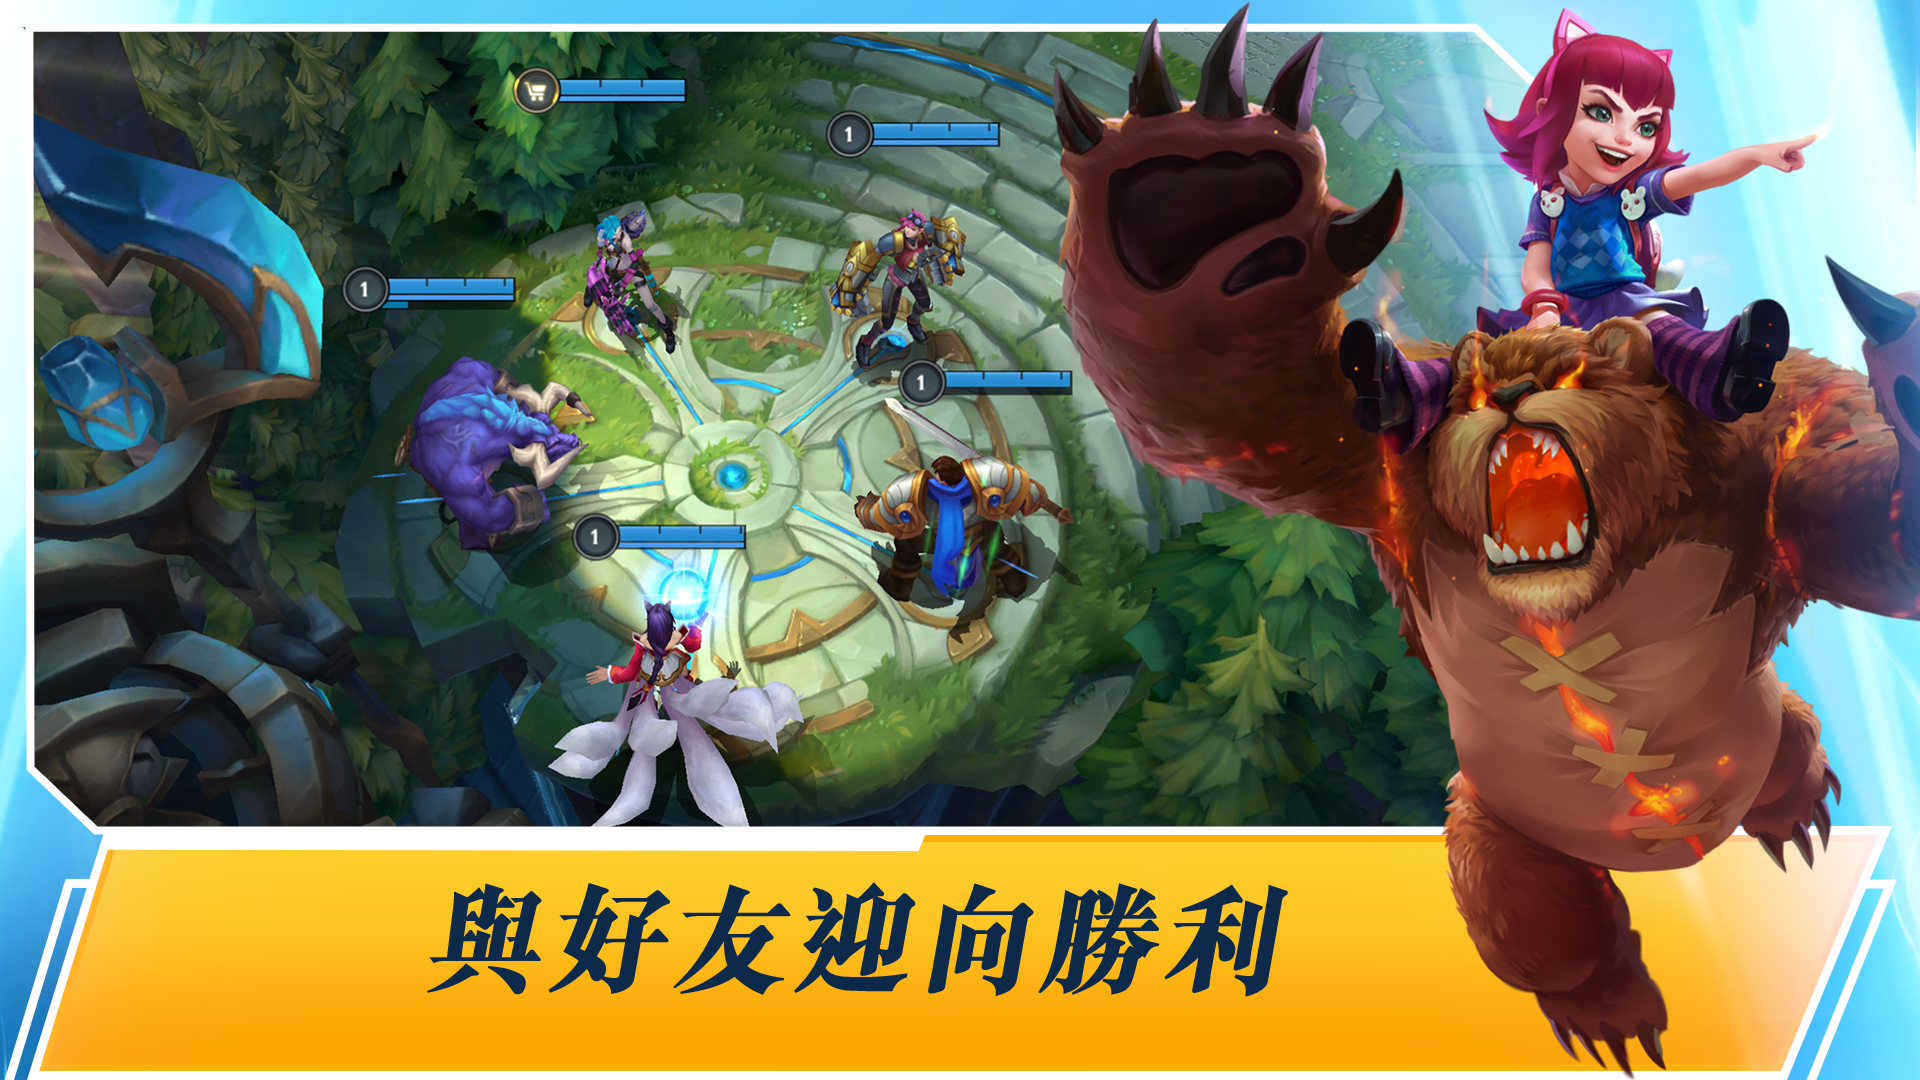 League of Legends Champions APK for Android - Download